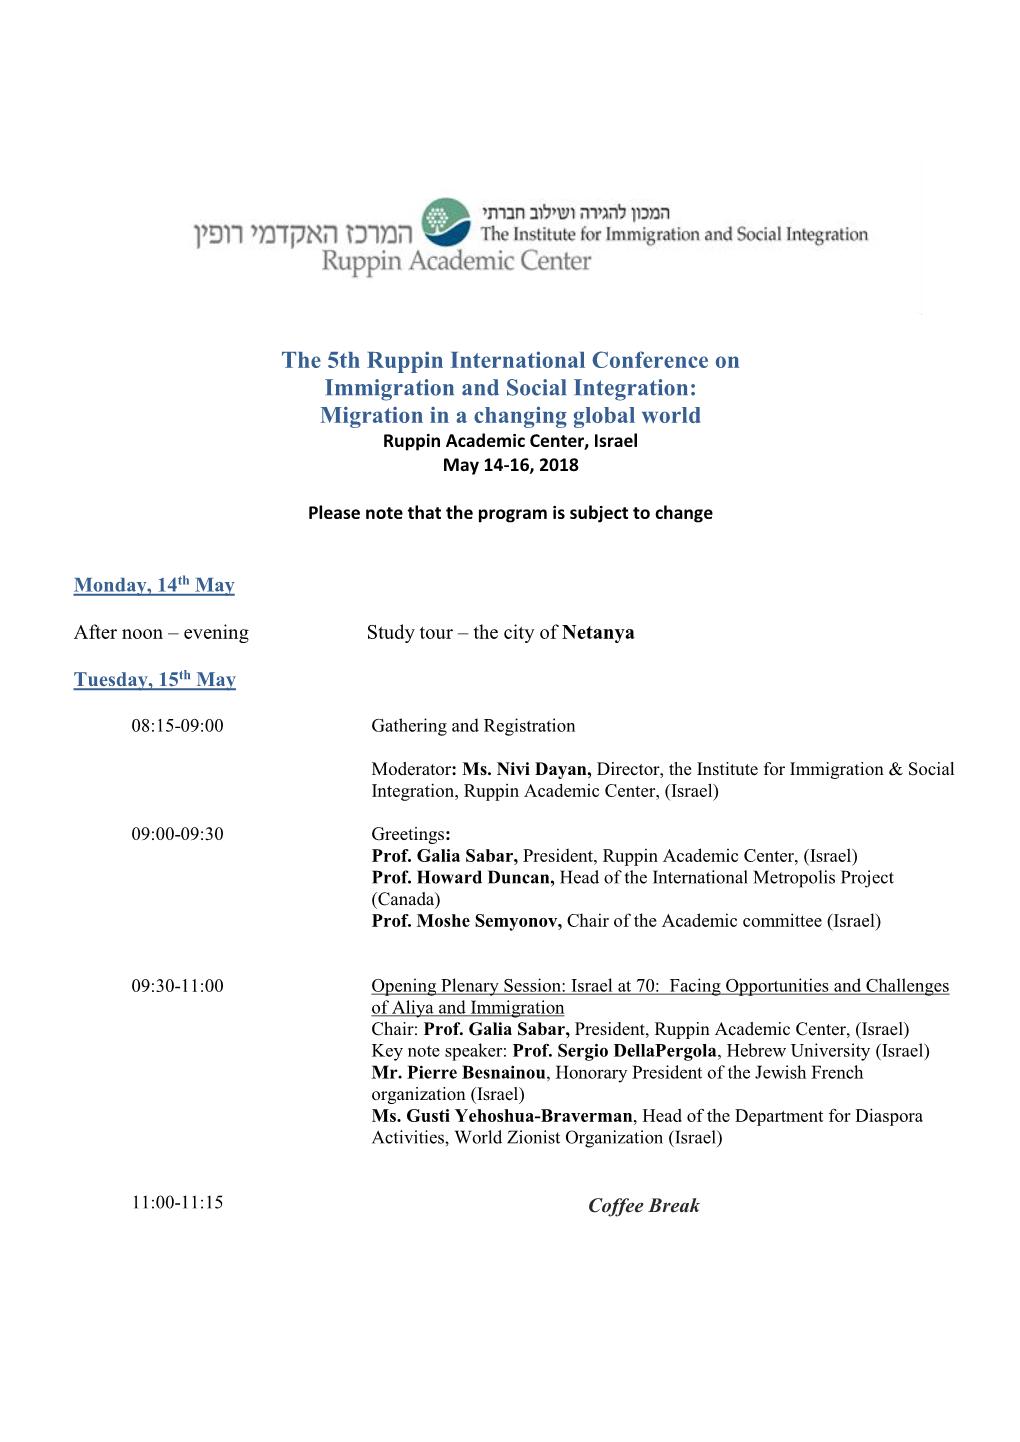 The 5Th Ruppin International Conference on Immigration and Social Integration: Migration in a Changing Global World Ruppin Academic Center, Israel May 14-16, 2018